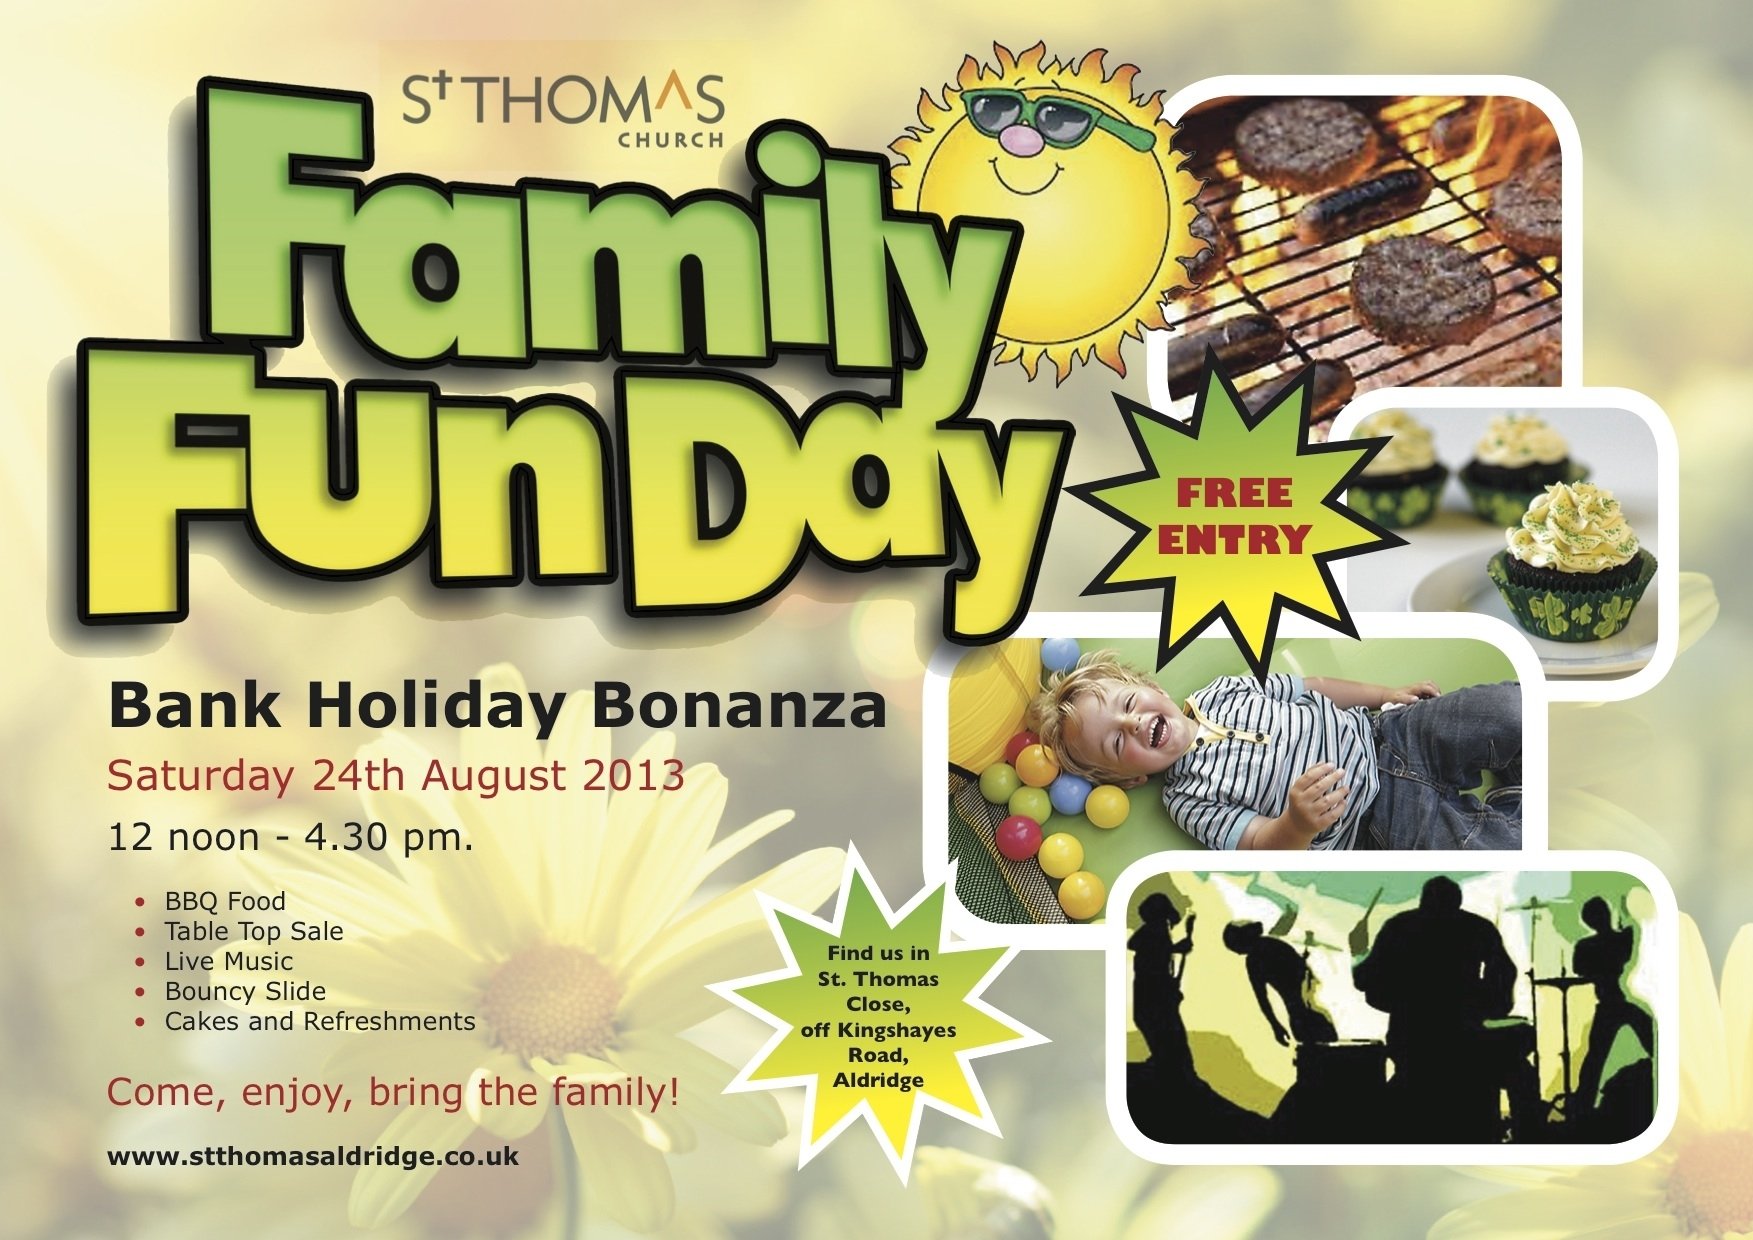 10 Fabulous Ideas For Family And Friends Day At Church another family fun day this saturday brownhillsbobs brownhills 2023